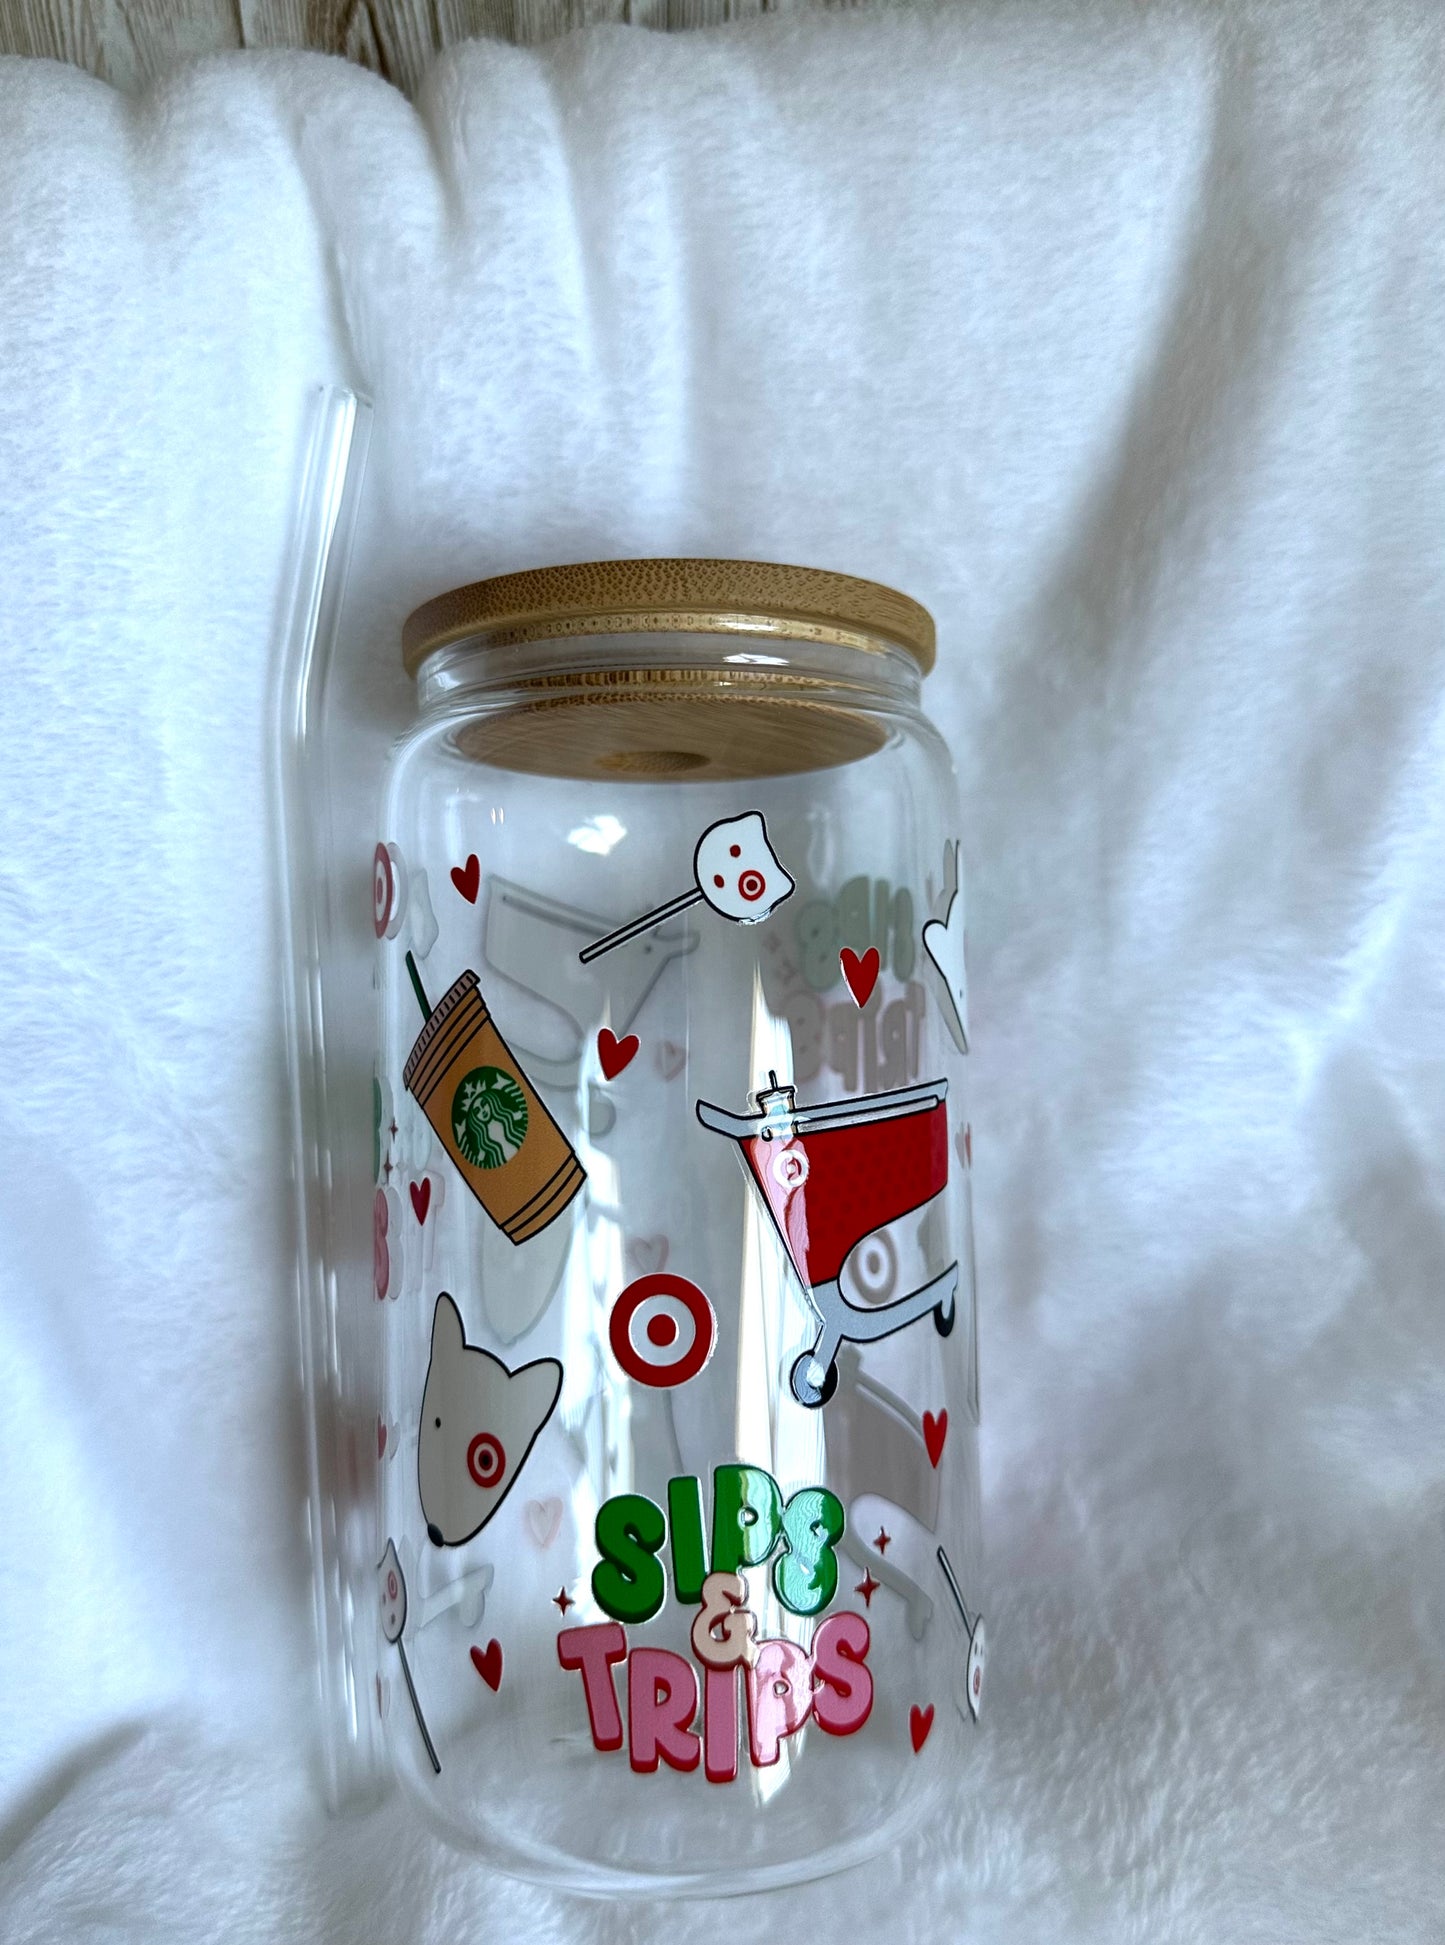 Sips and Trips Target Starbucks Glass Cup